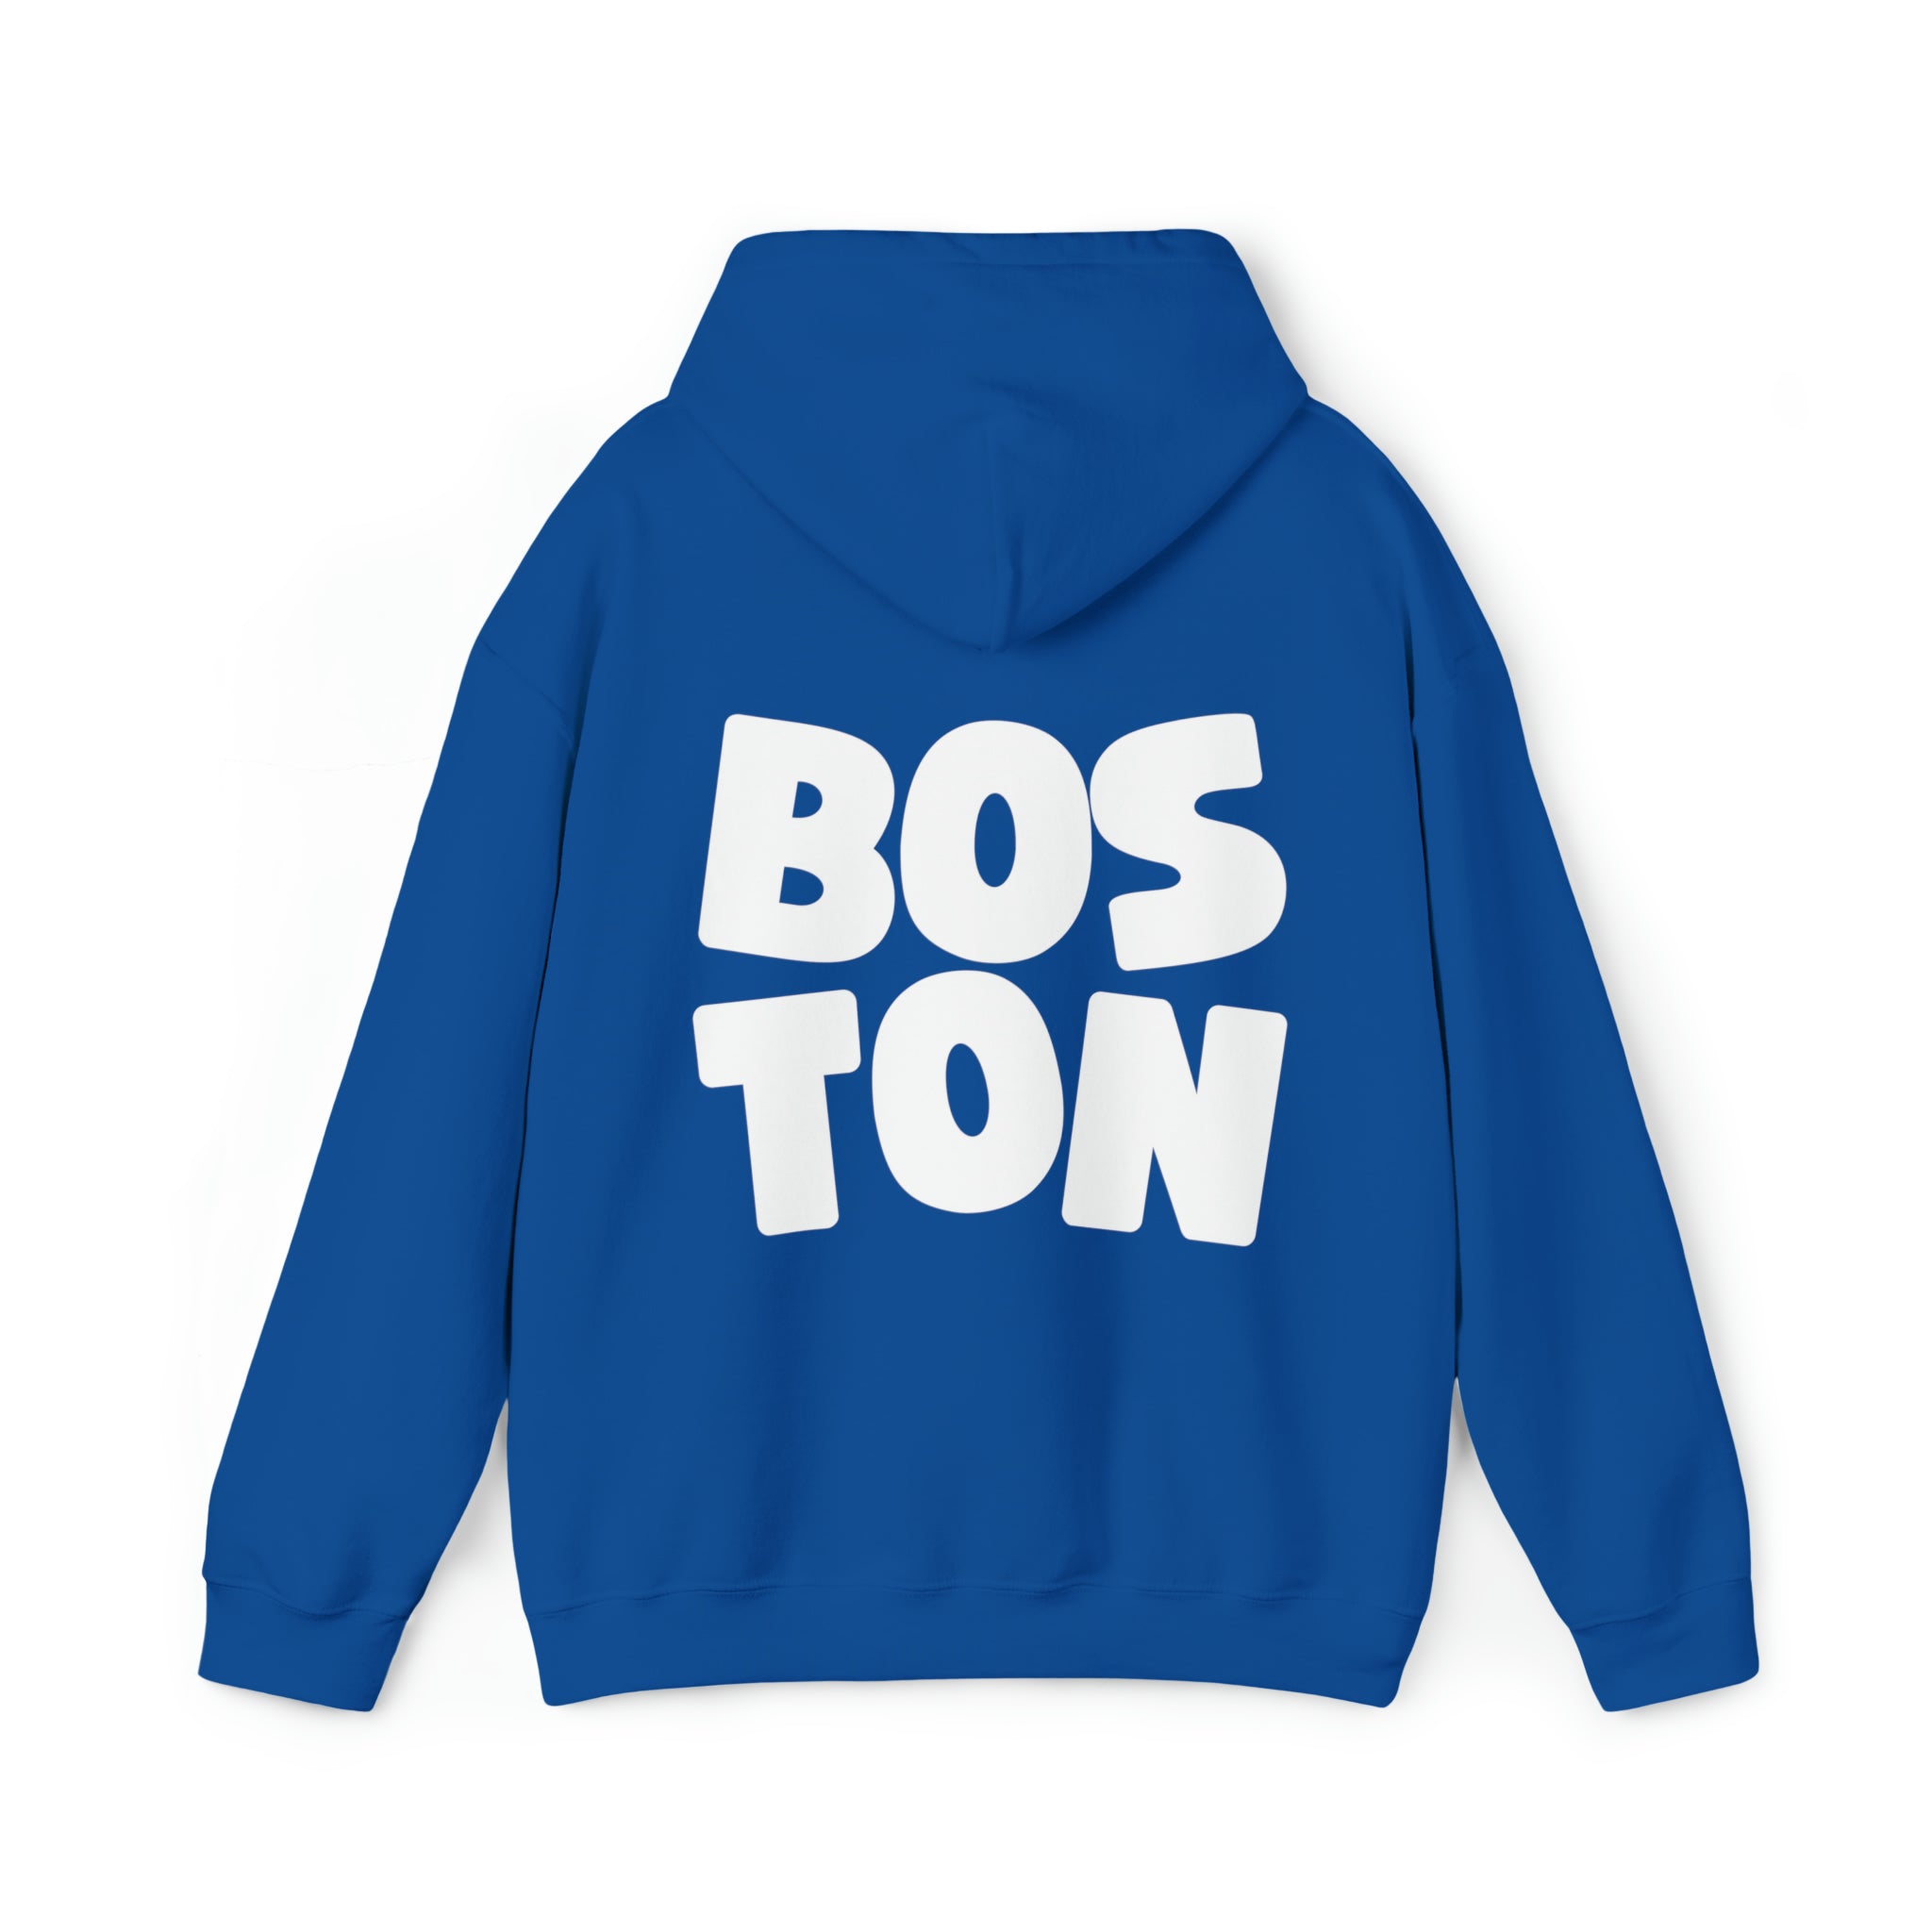 Front view of the Boston Hoodie Sweatshirt from GS Print Shoppe.